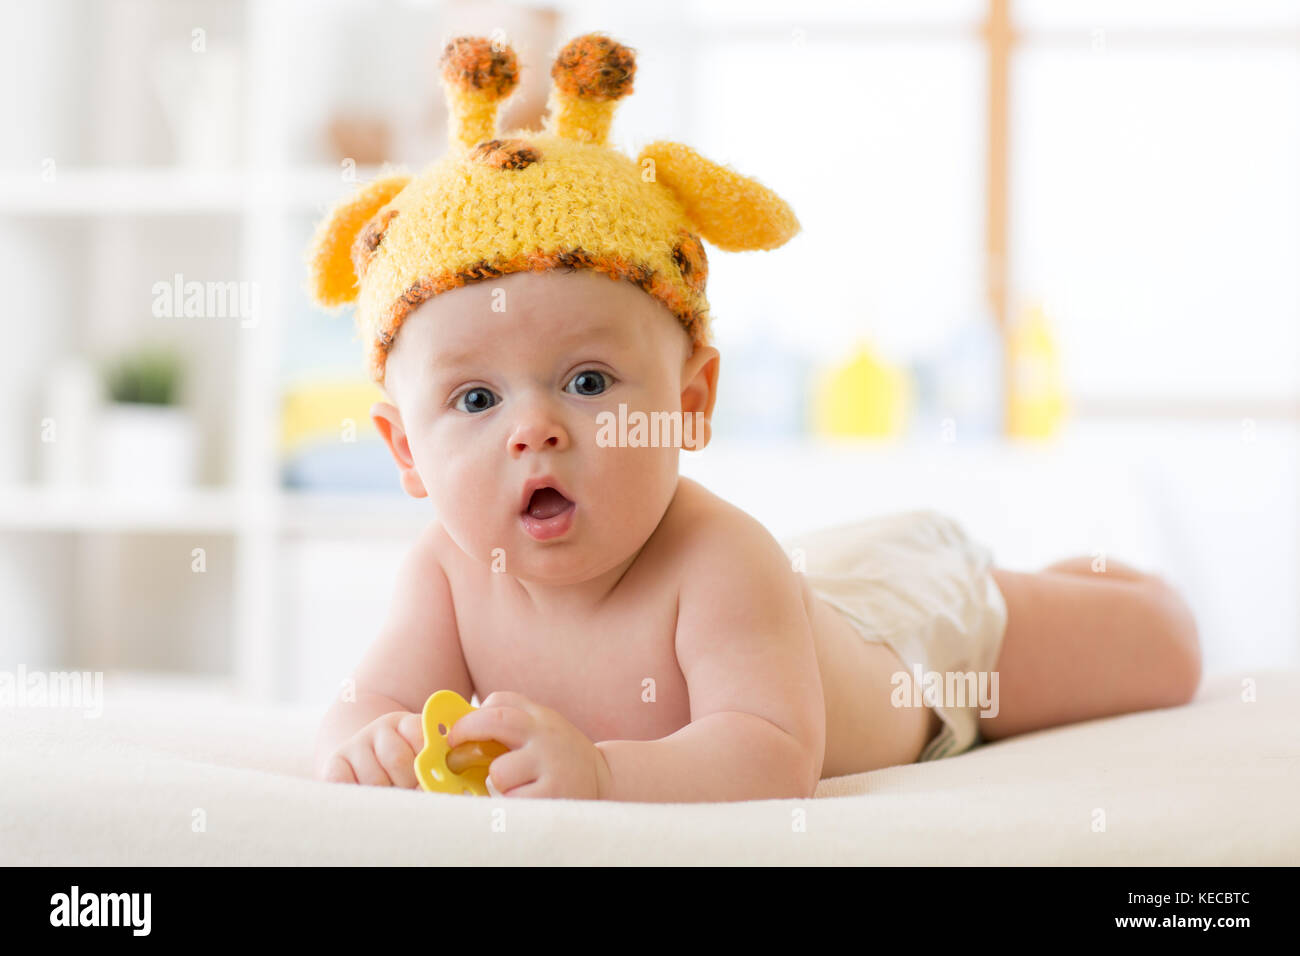 Adorable baby boy lying on tummy and weared funny hat Stock Photo